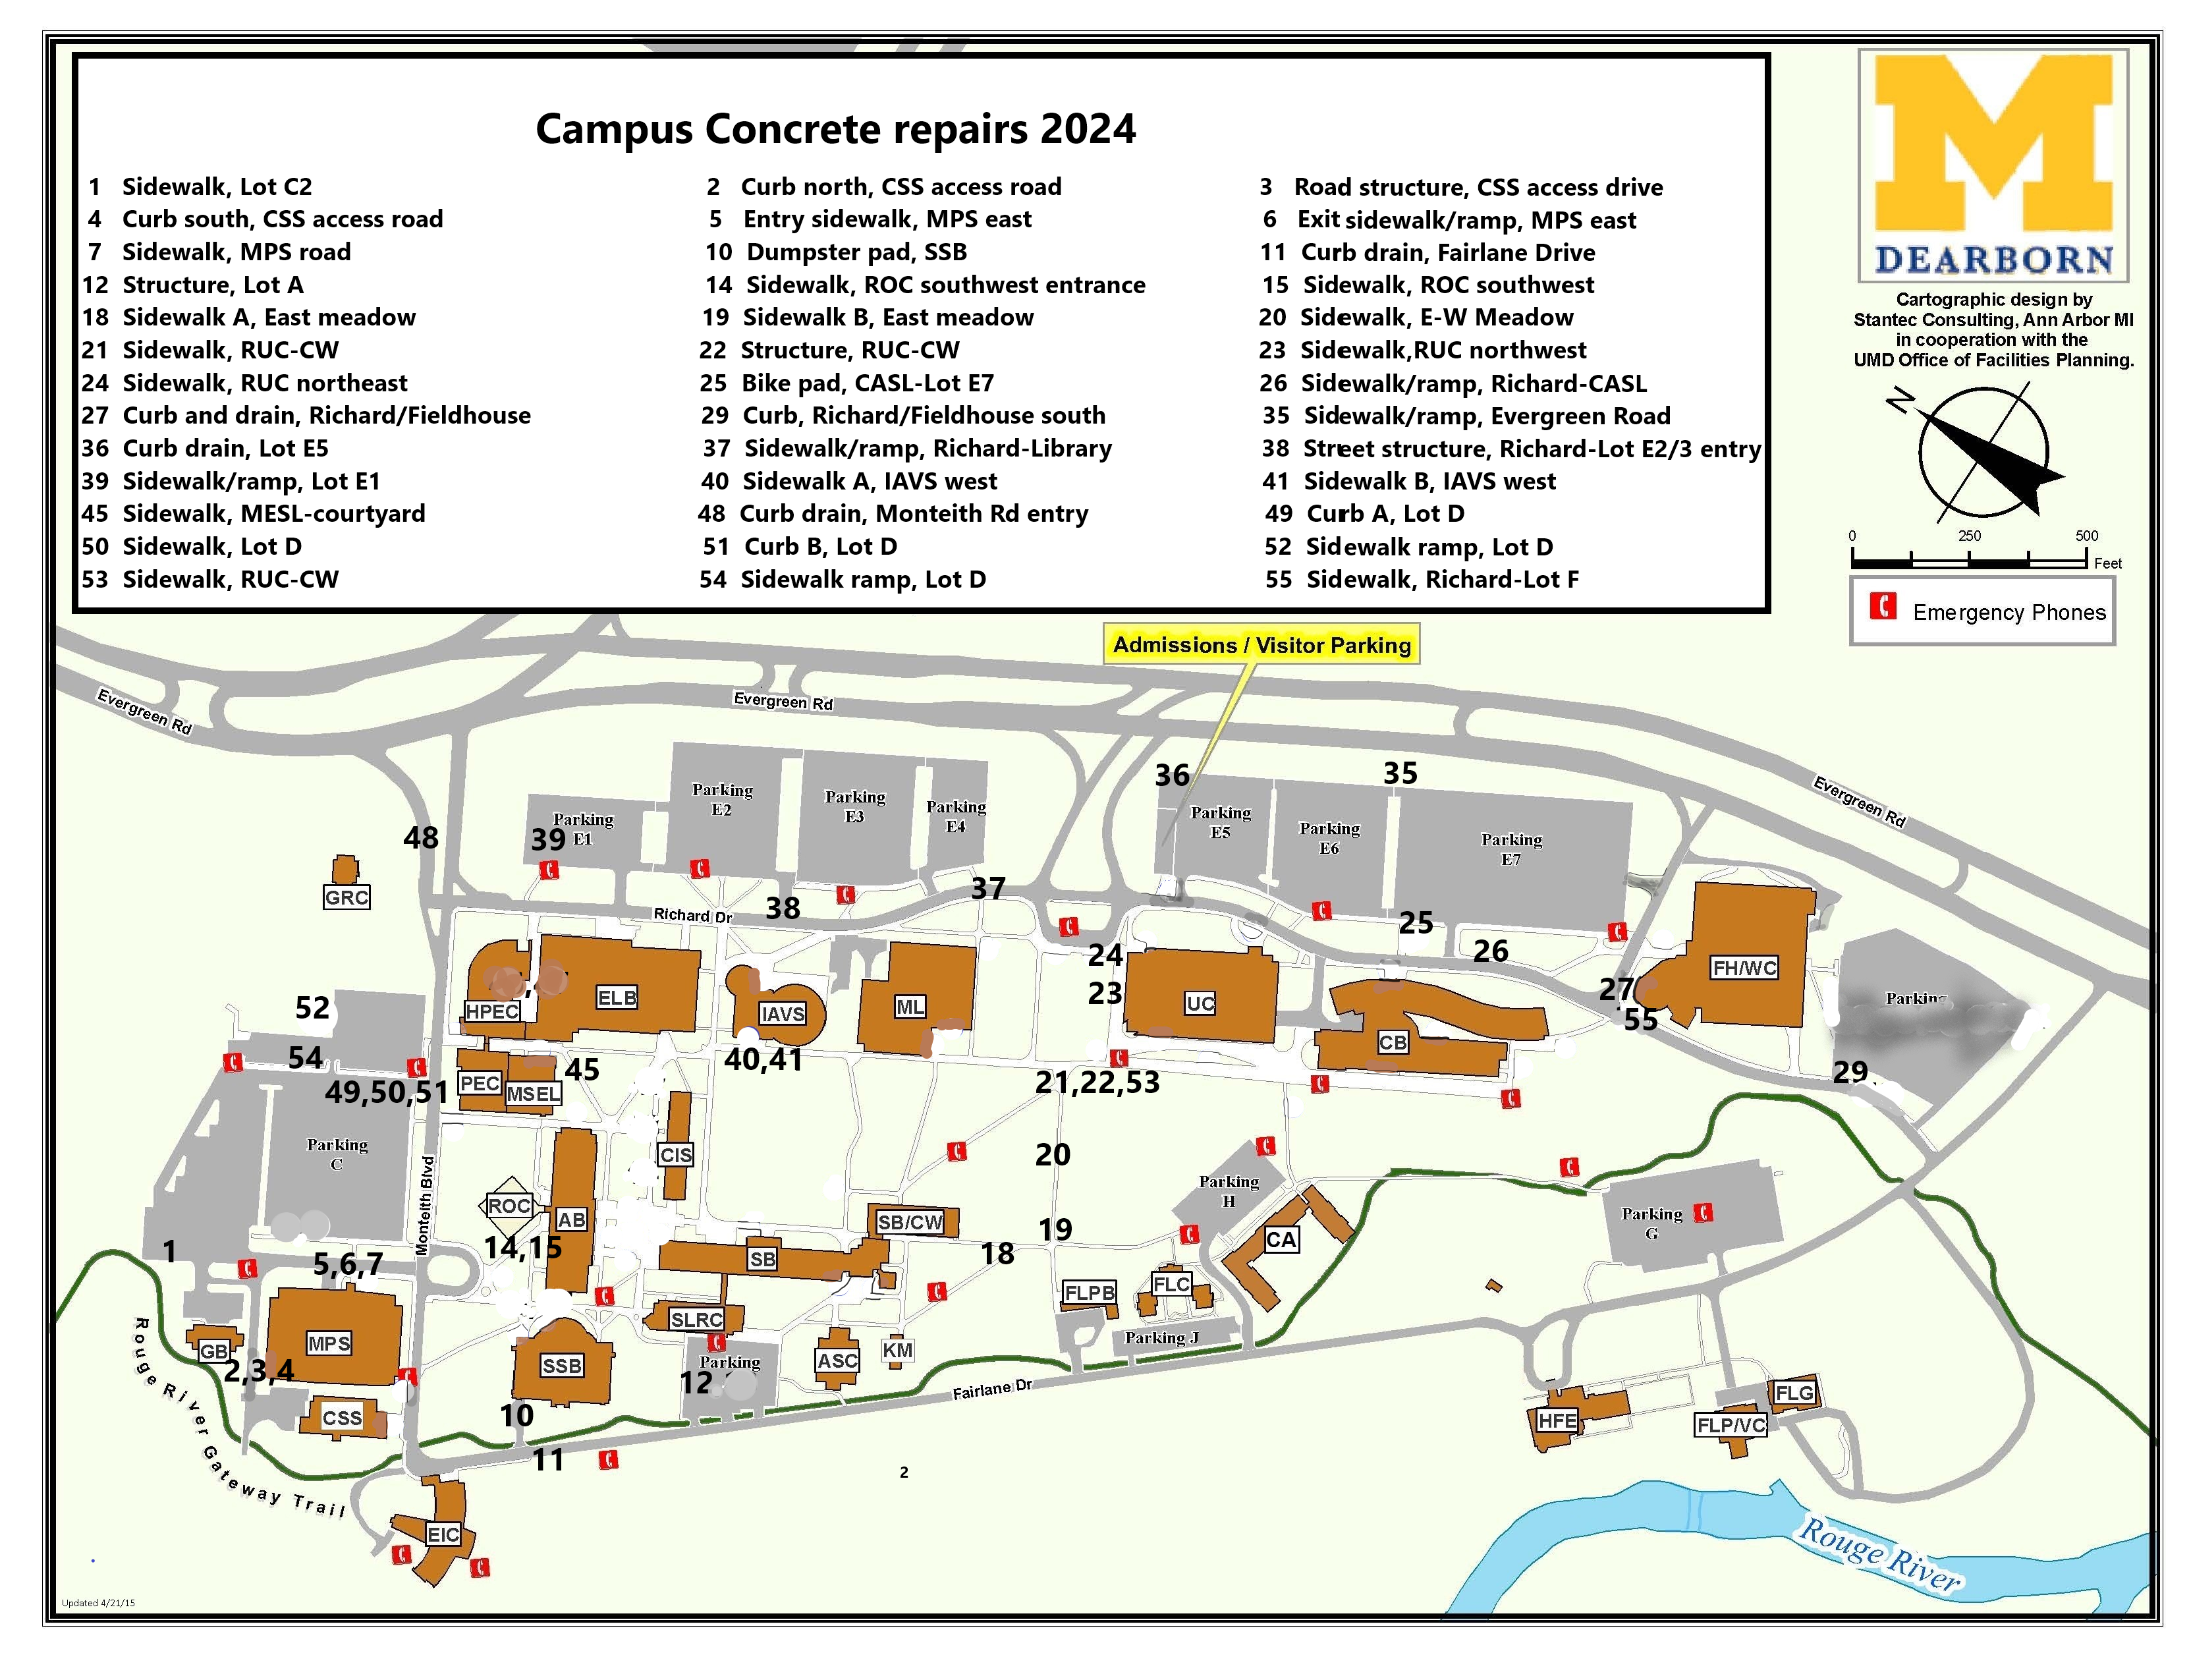 Map of concrete work on campus